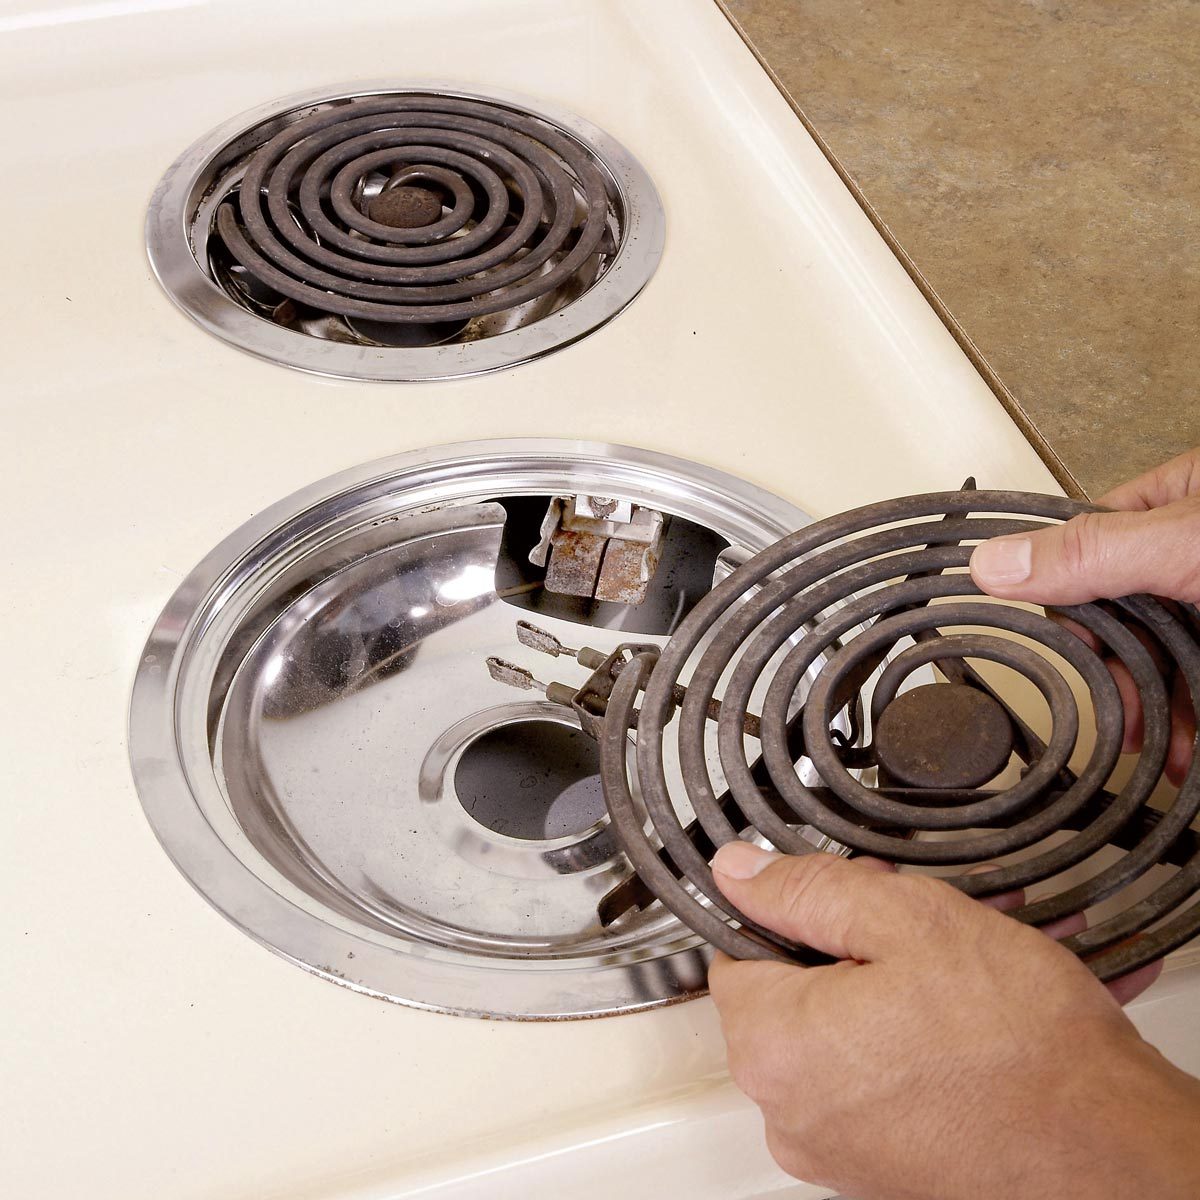 How to Clean an Electric Stove (In Only 5 Steps!)